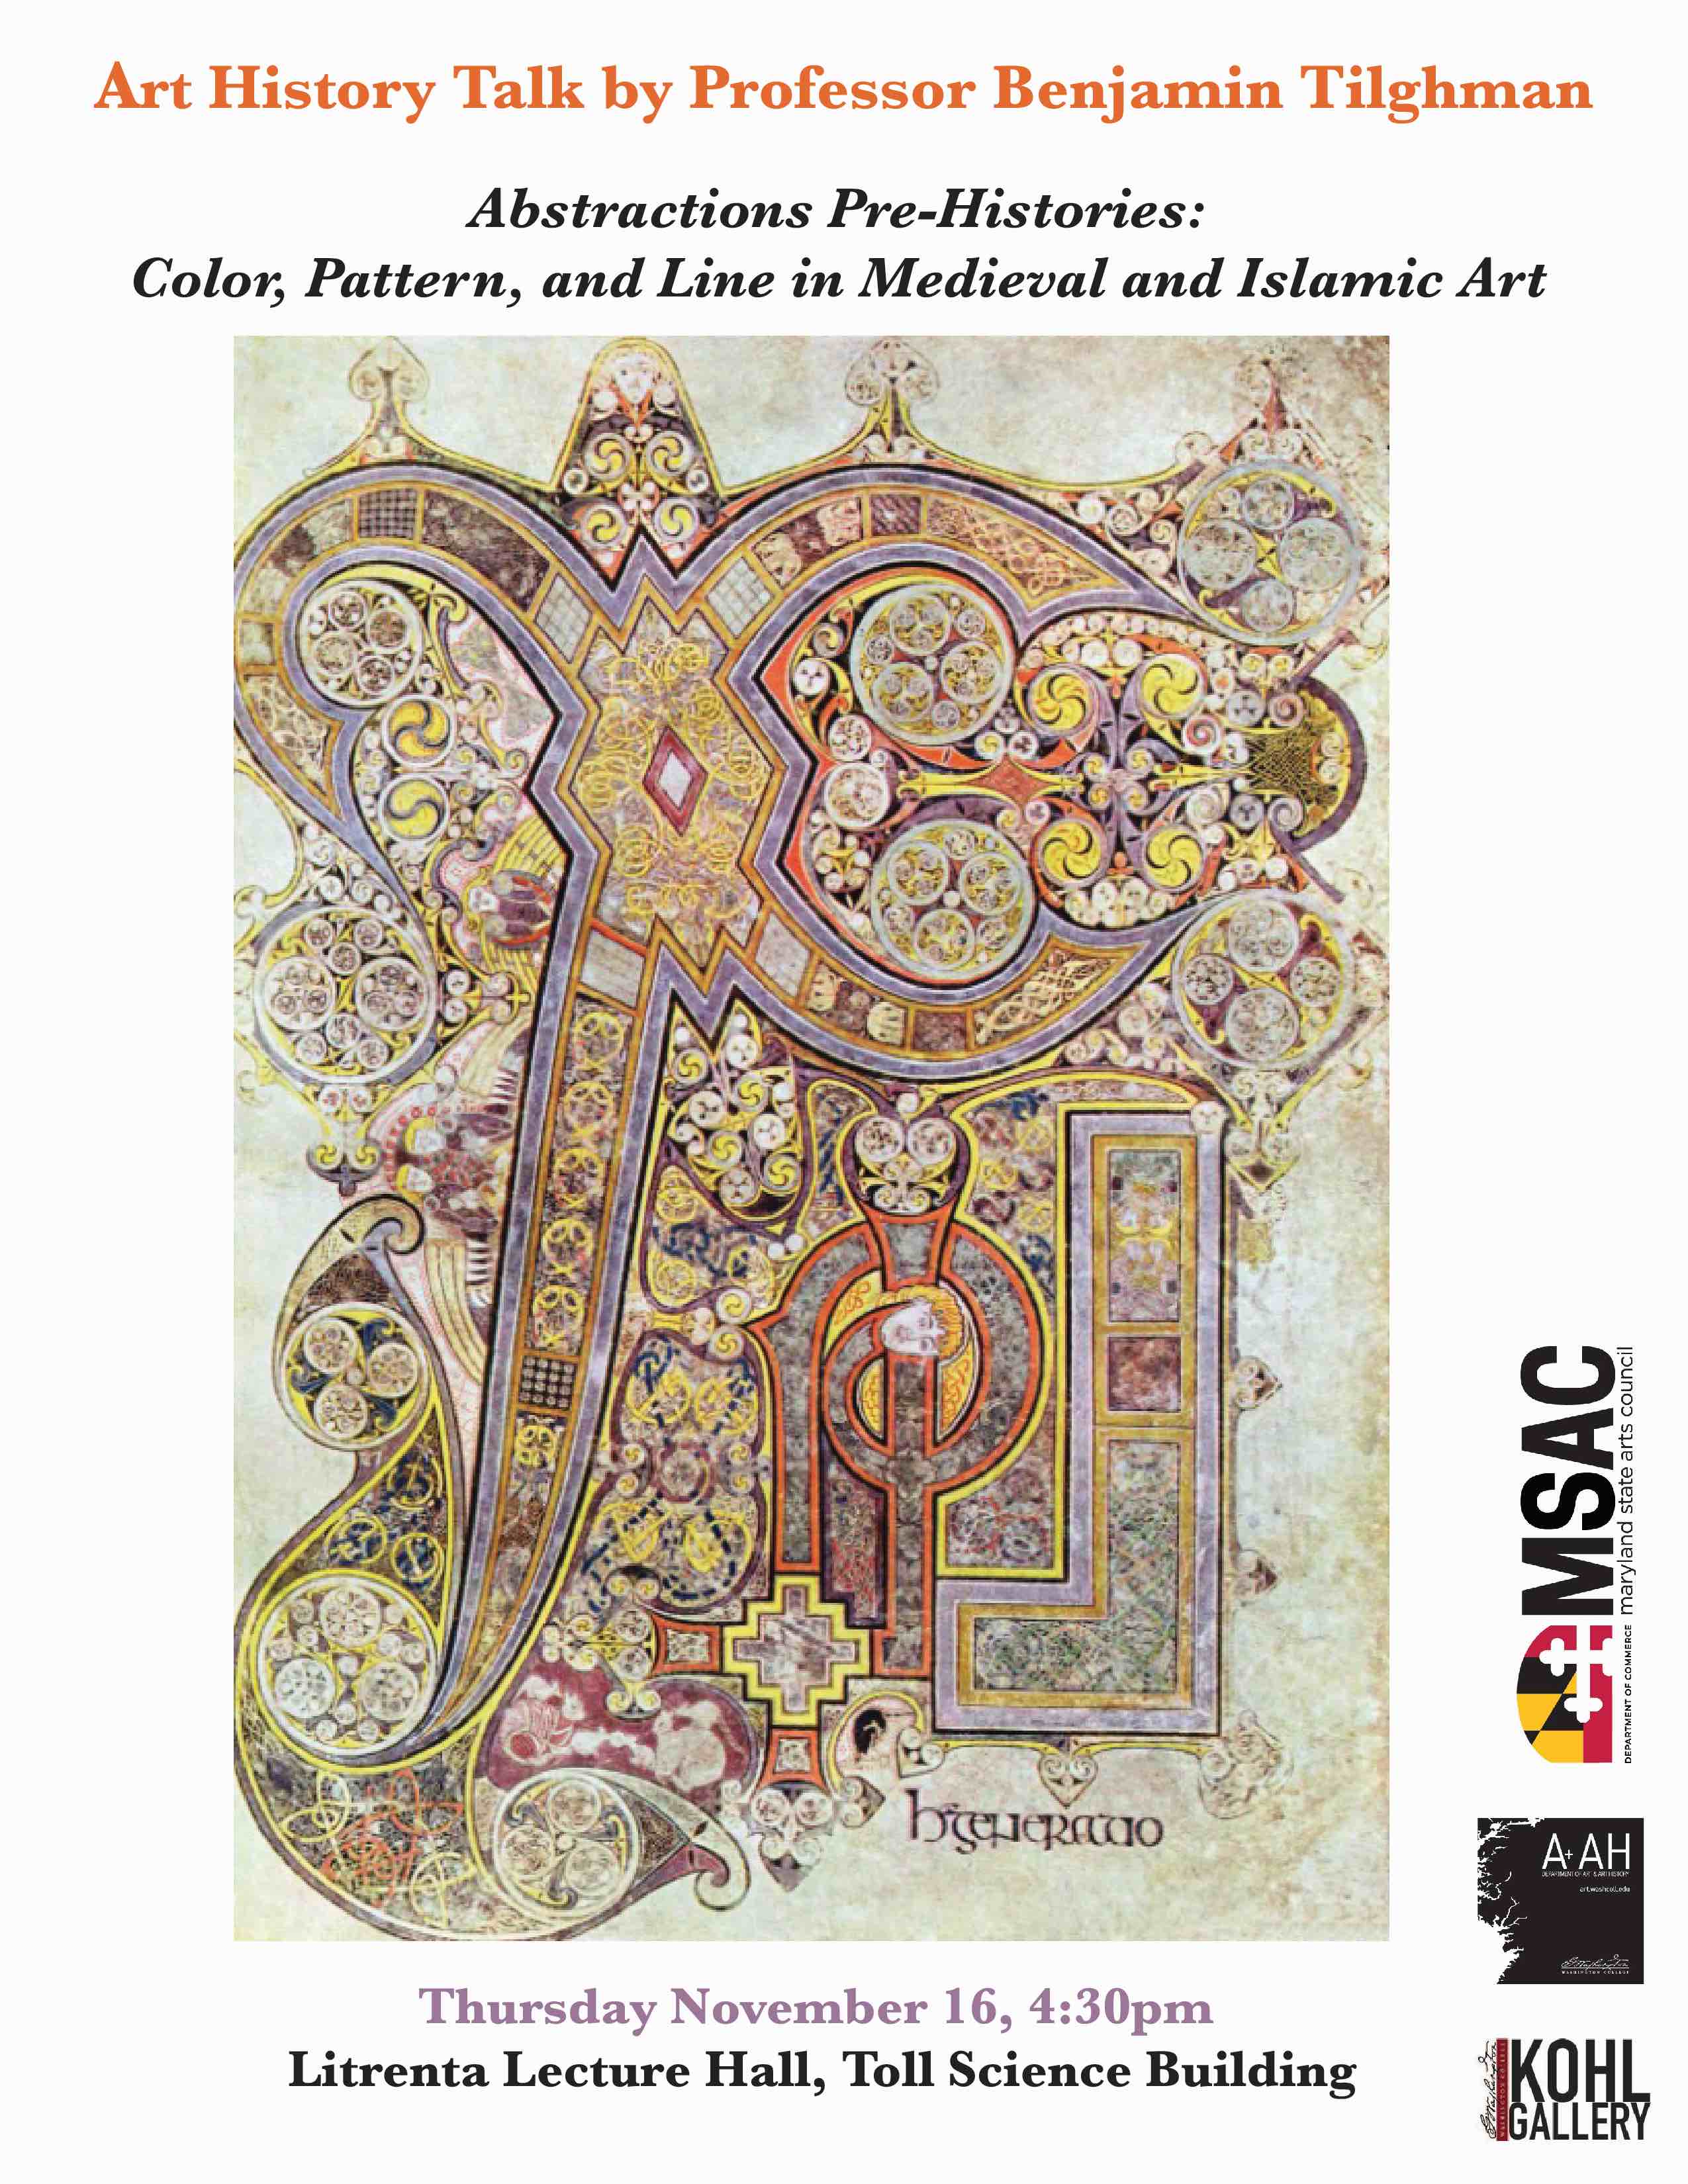 Talk by Professor Benjamin Tilghman: Abstractions Pre-Histories: Color, Pattern, and Line in Medieval and Islamic Art: